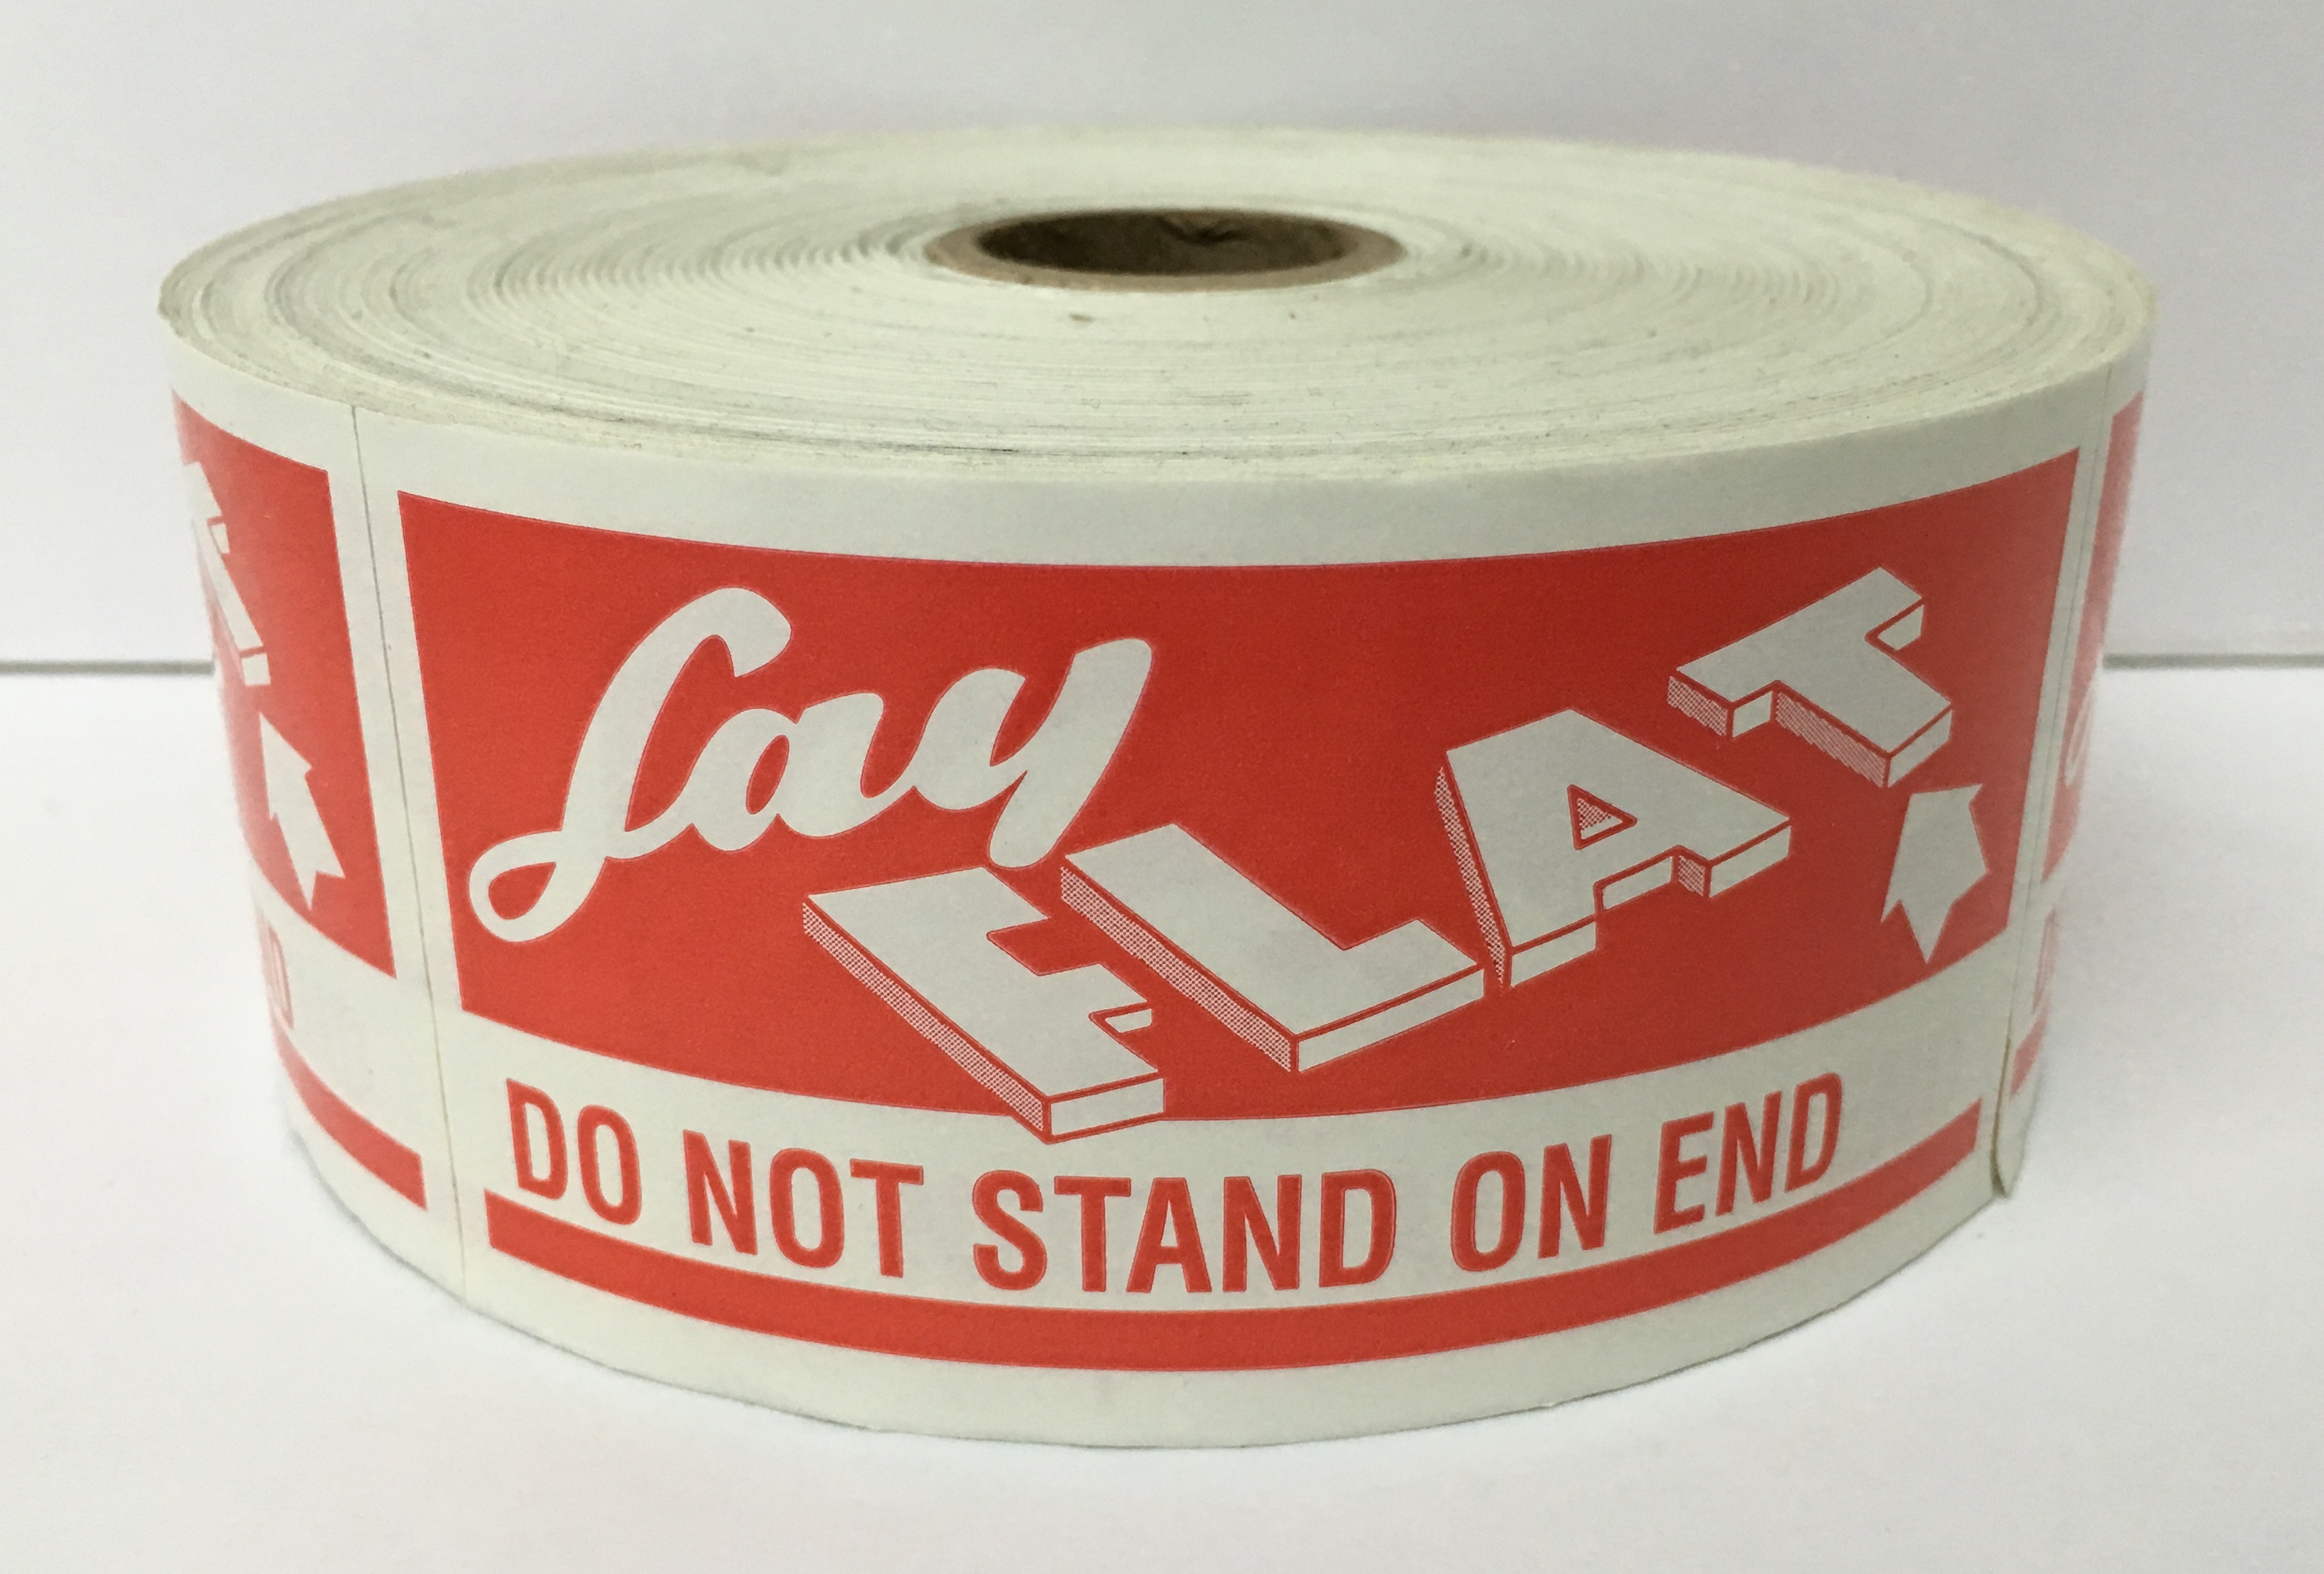 LAY FLAT / DO NOT STAND ON END Labels - 2" x 4", 500/Roll